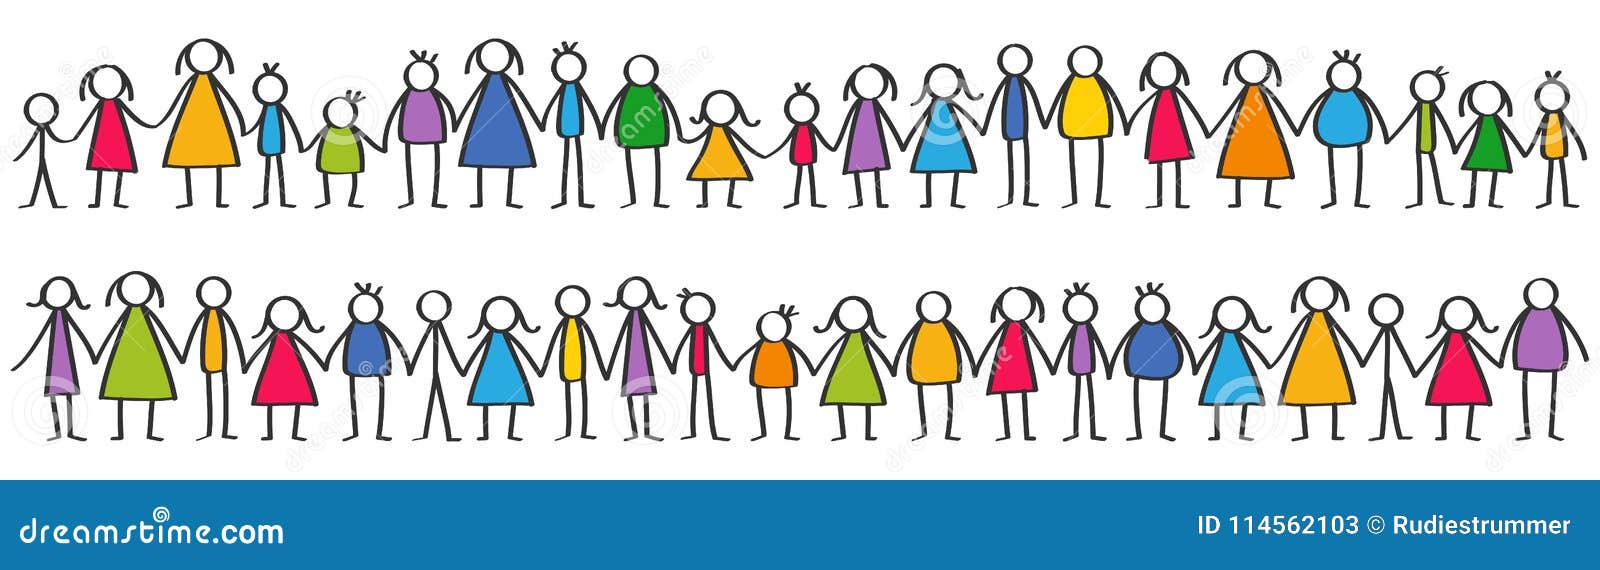 Vector Illustration Of Colorful Male And Female Stick Figures Children